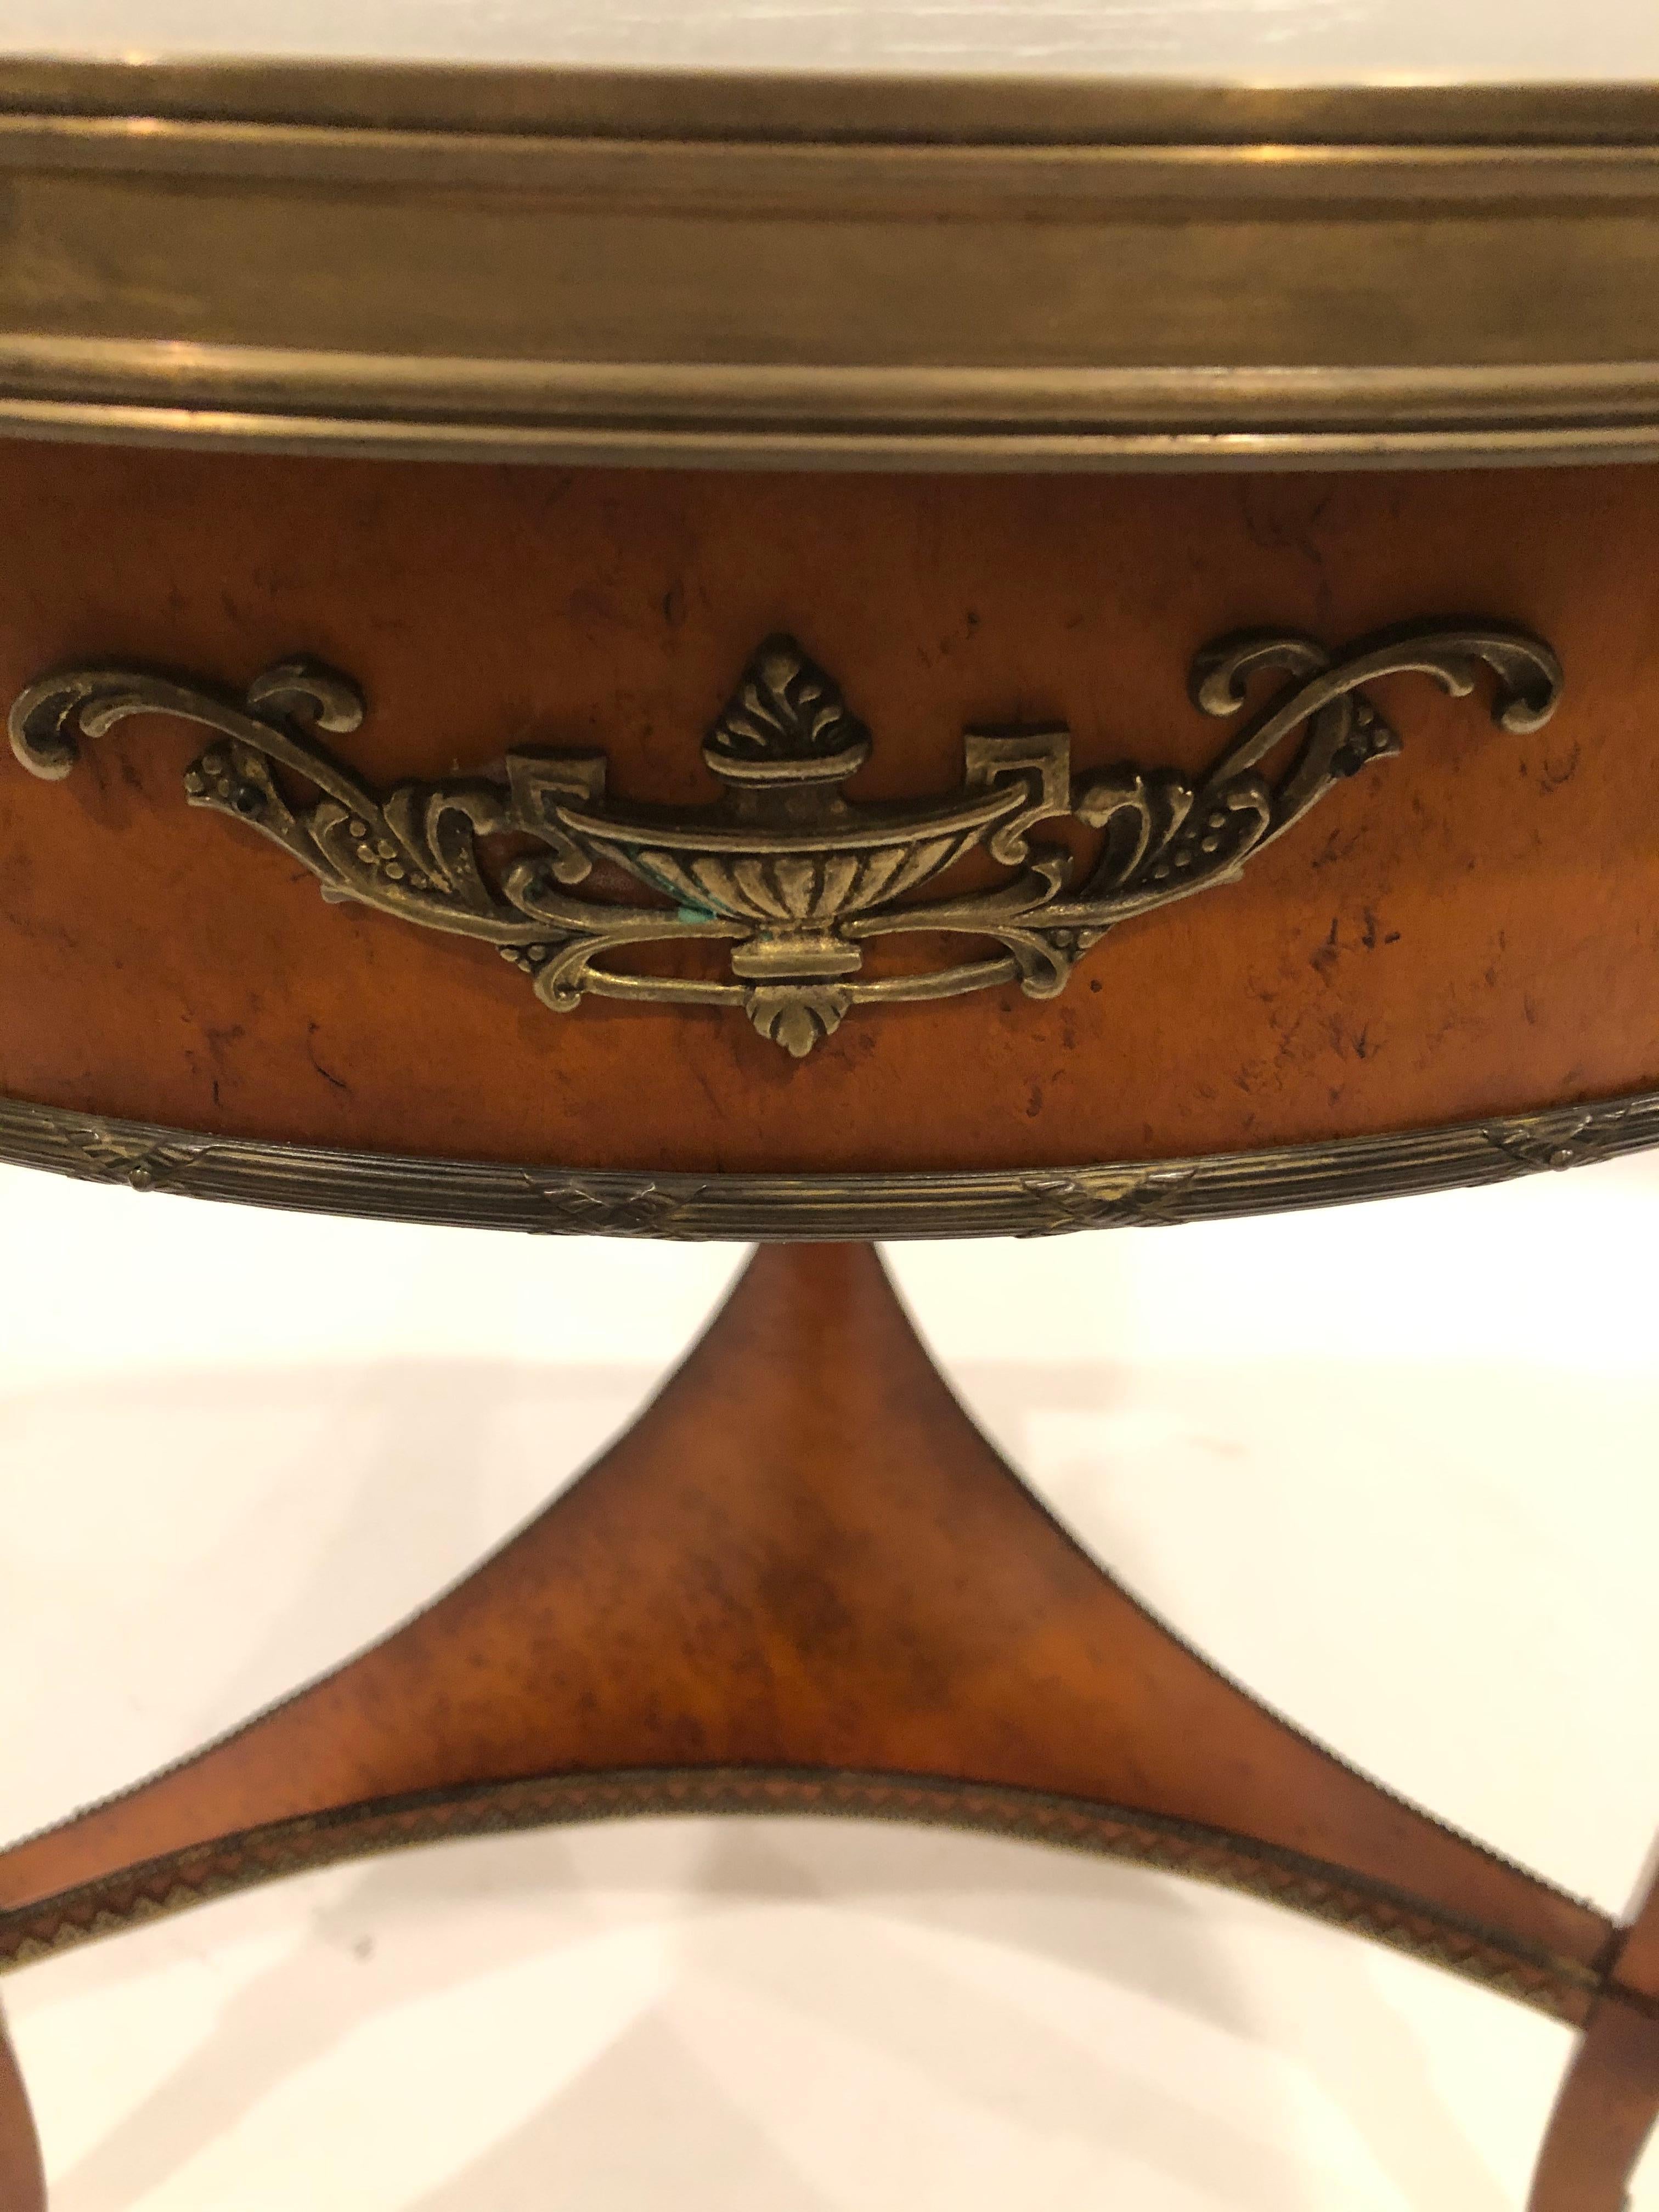 Superbly crafted elegant round side table having burl base with handsome bronze figural decoration at the top of each leg as well as other bronze flourishes and gallery around the periphery. The top is a gorgeous very dark green, almost black piece